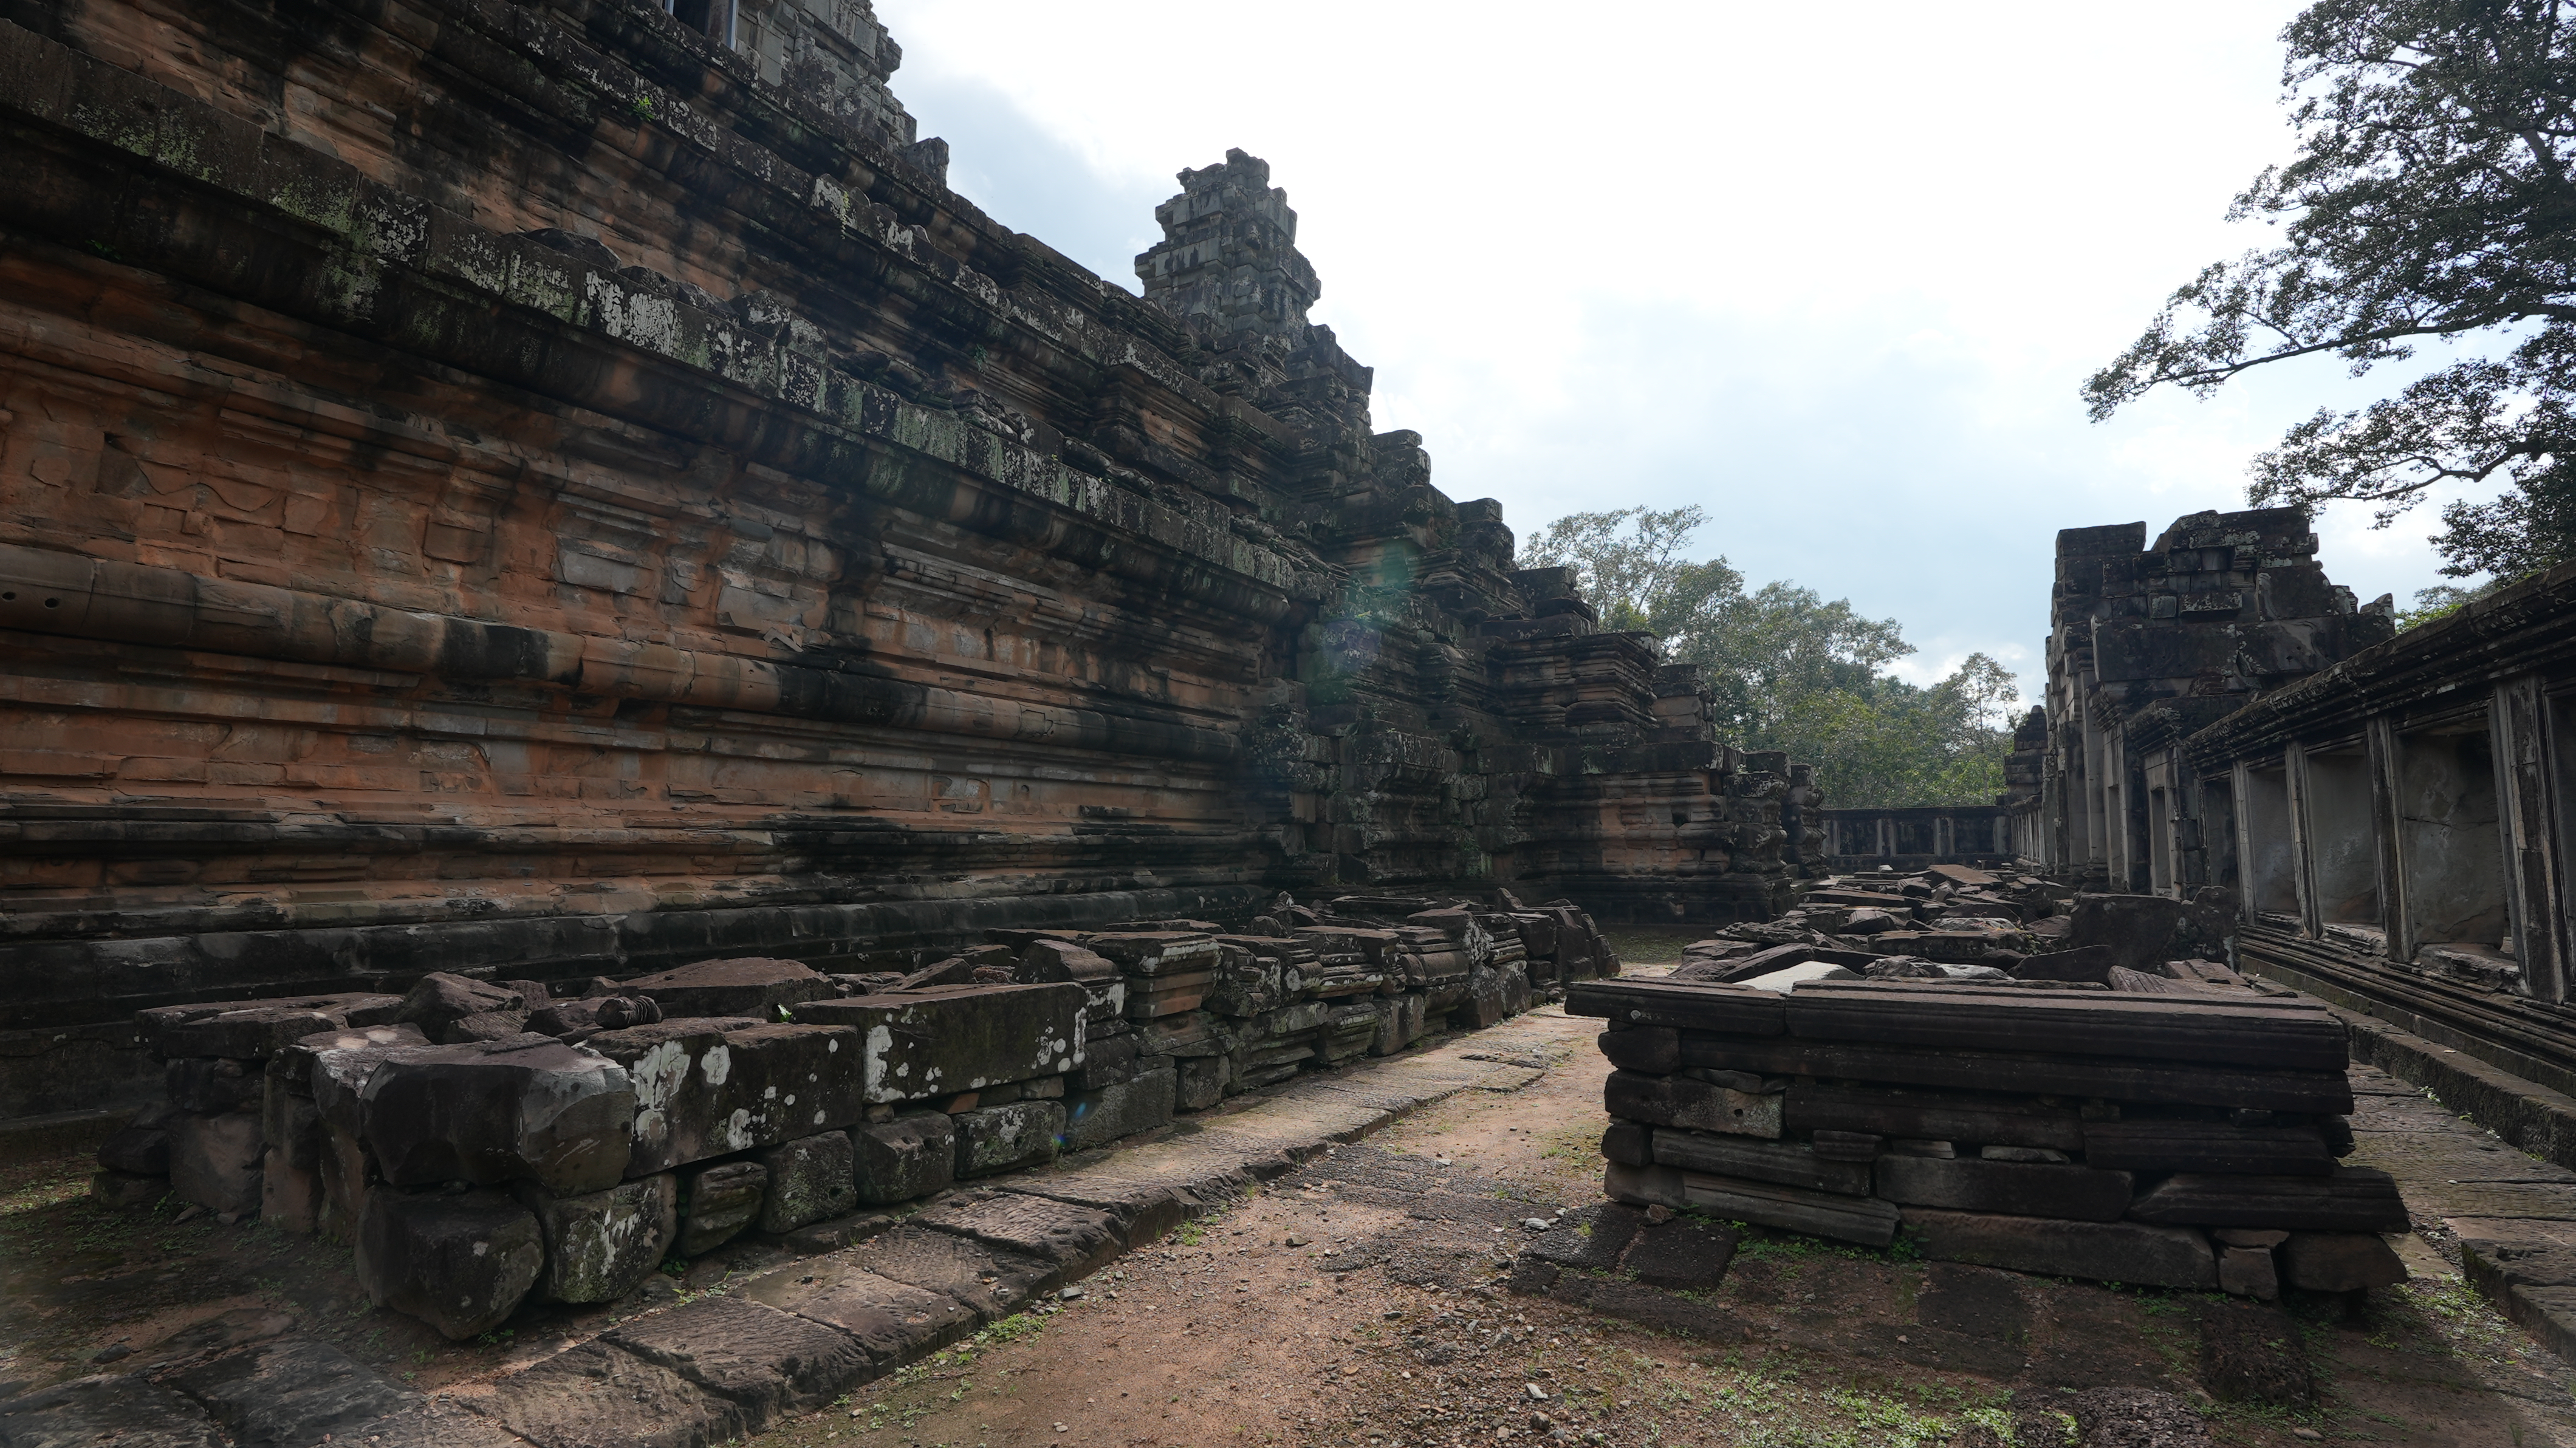 A glimpse of the Ta Keo pyramid at the Angkor Archaeological Park, Cambodia /CGTN